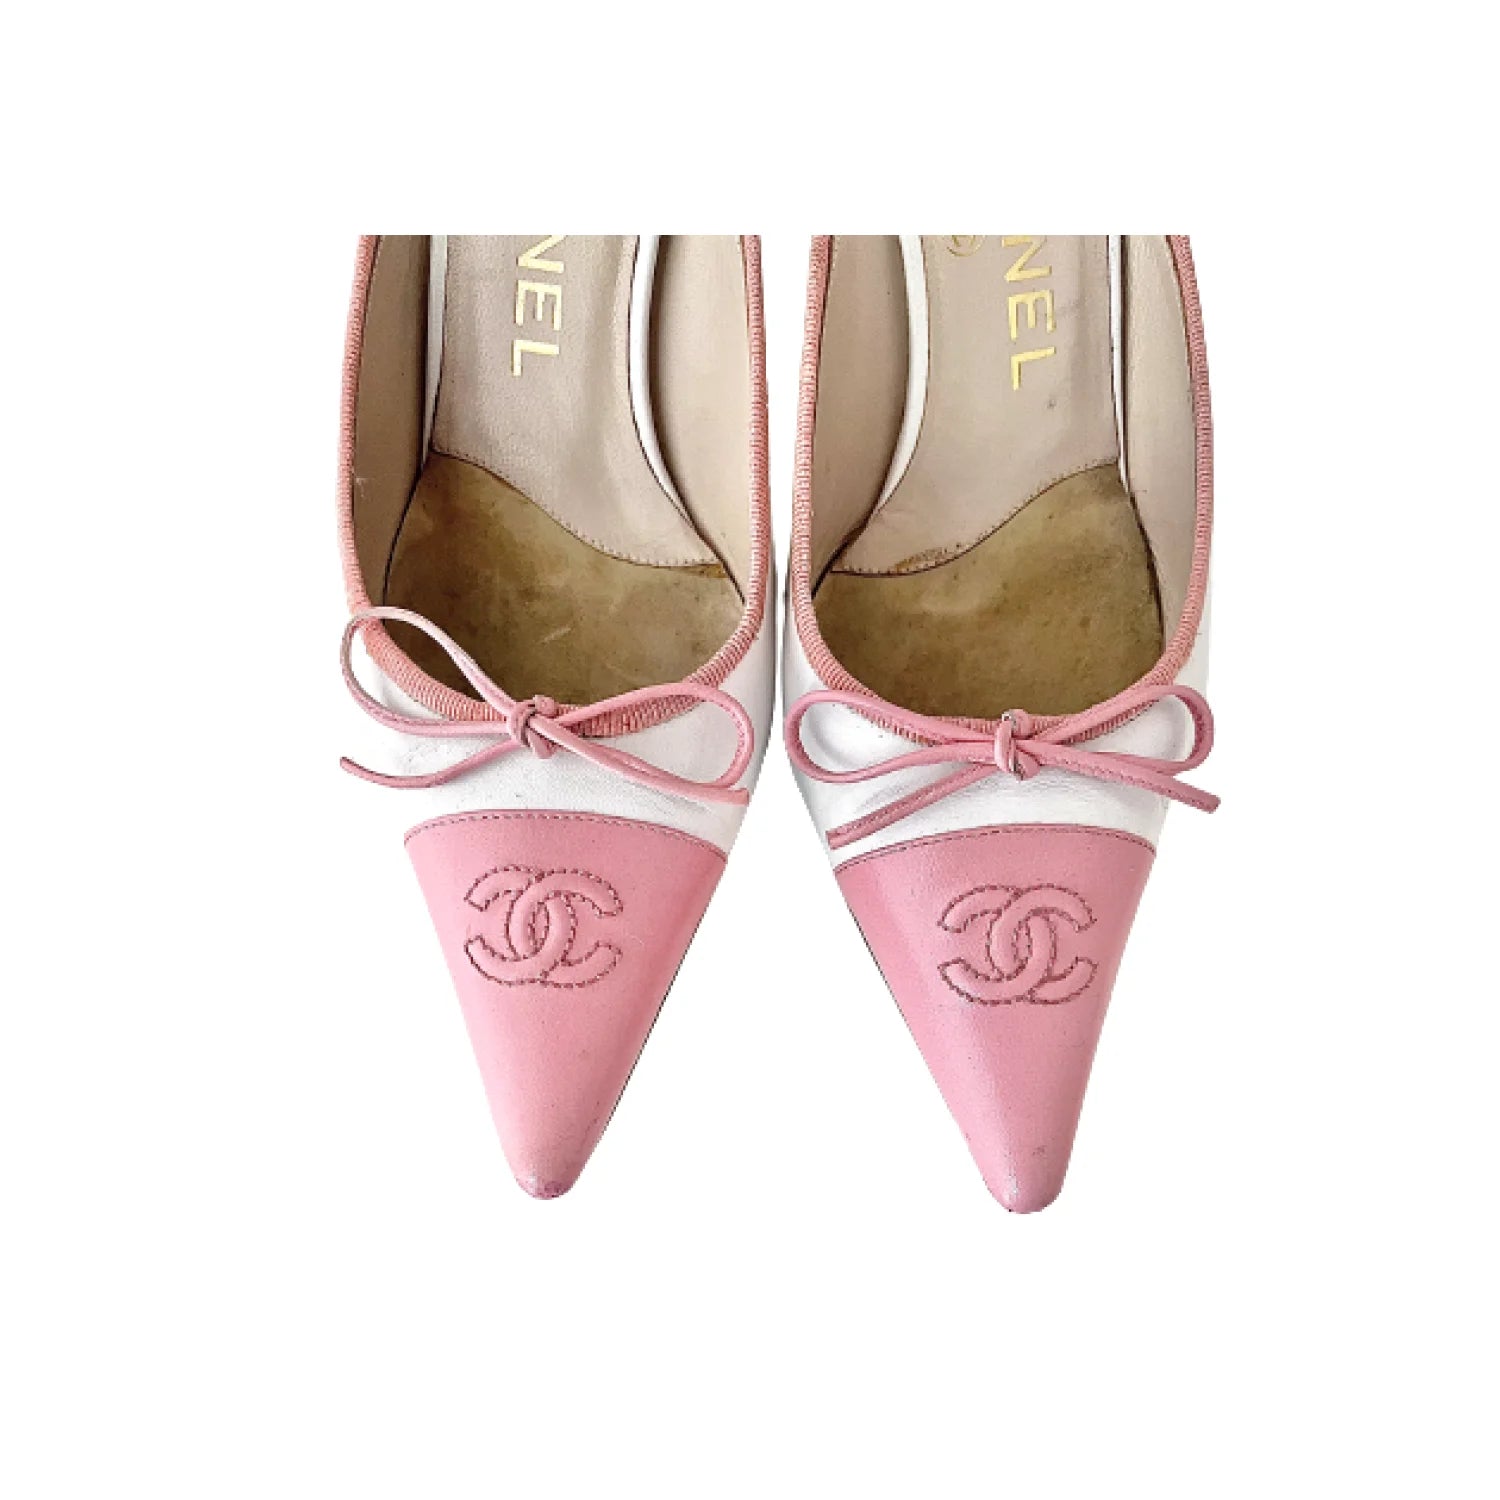 CHANEL Iconic "CC" Two-Tone Logo Toe Cap Bow Kitten Mules in Pink, 36.5